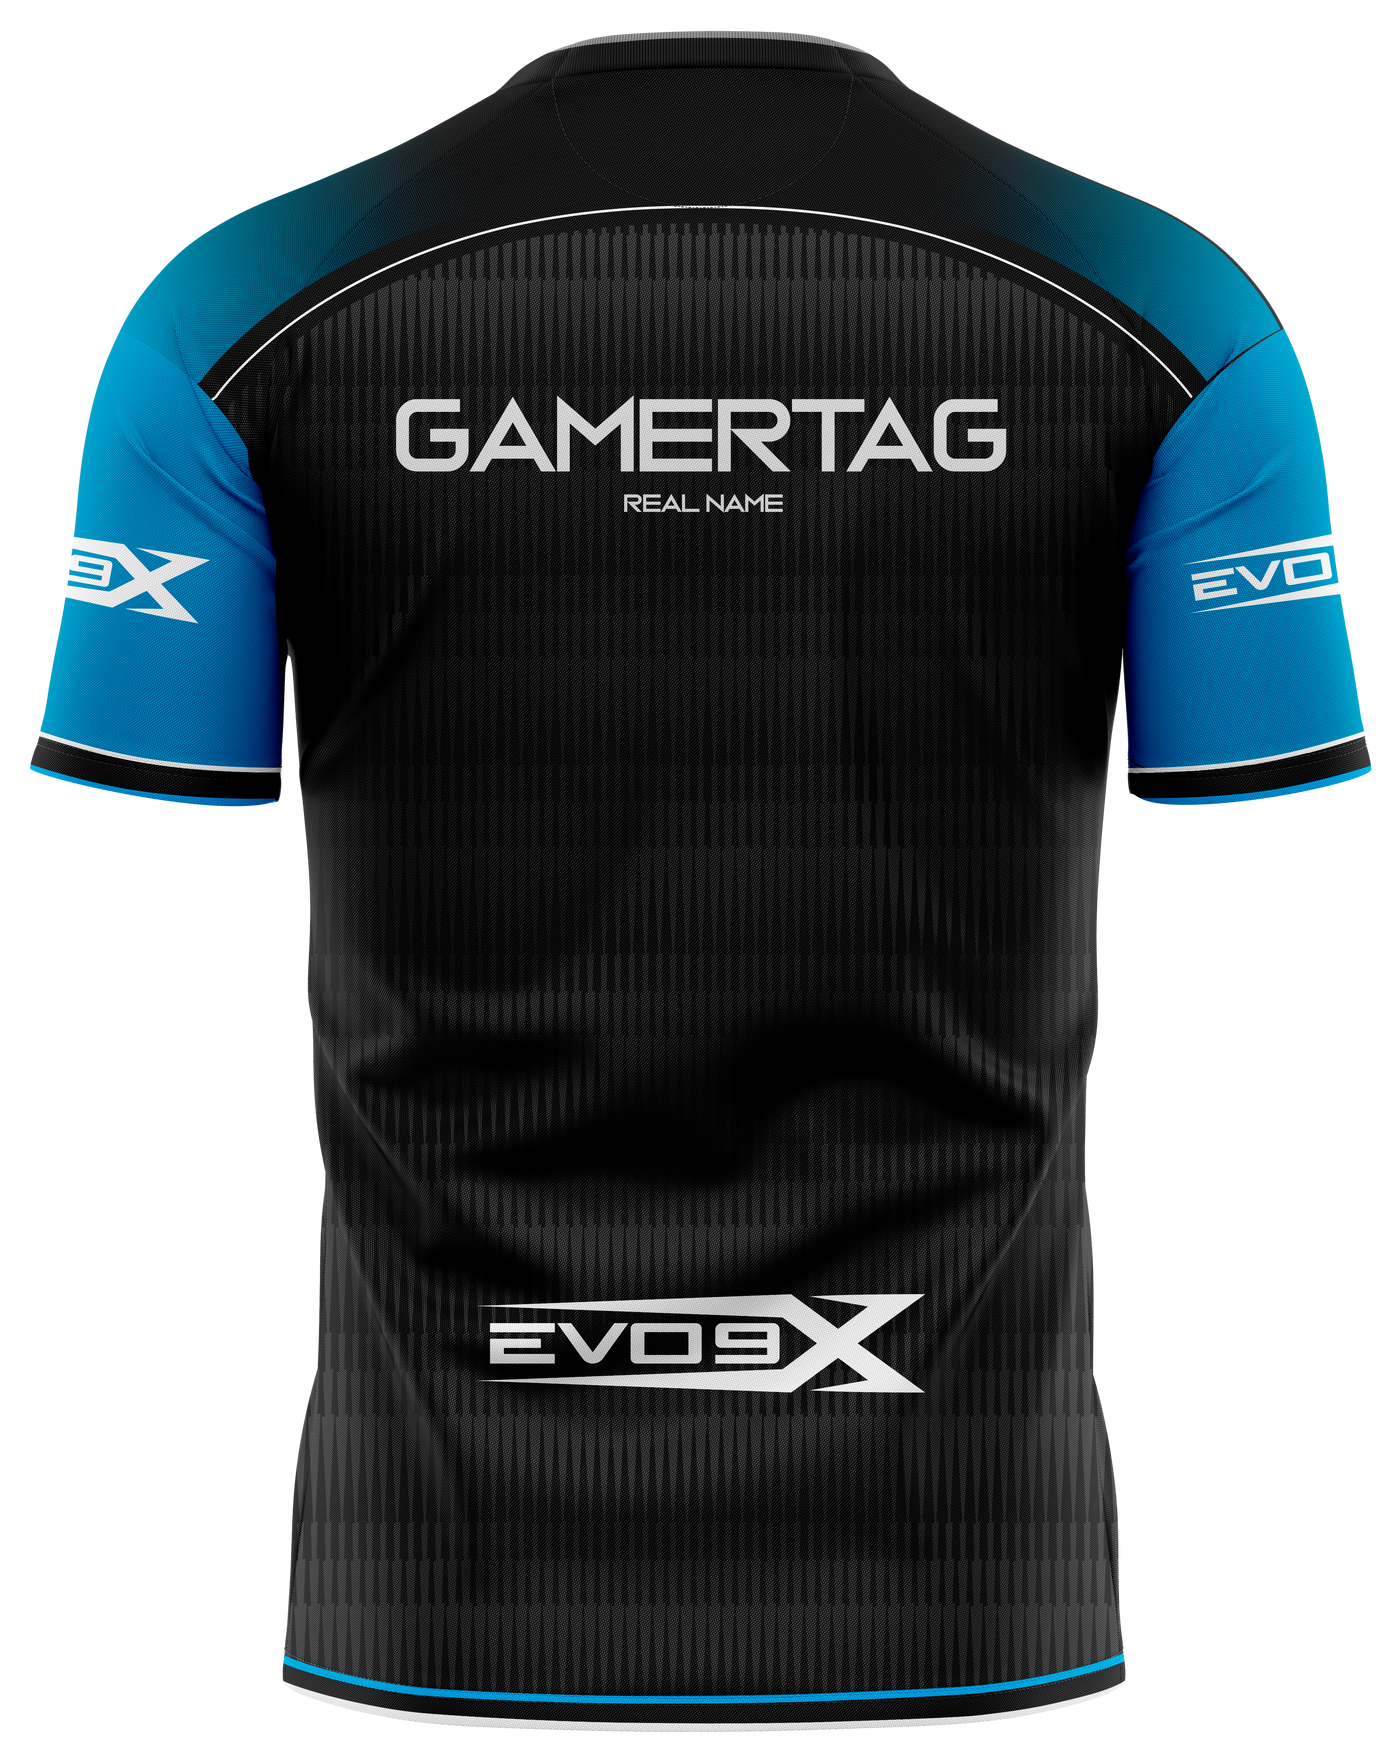 AS1 Gaming Network Pro Jersey